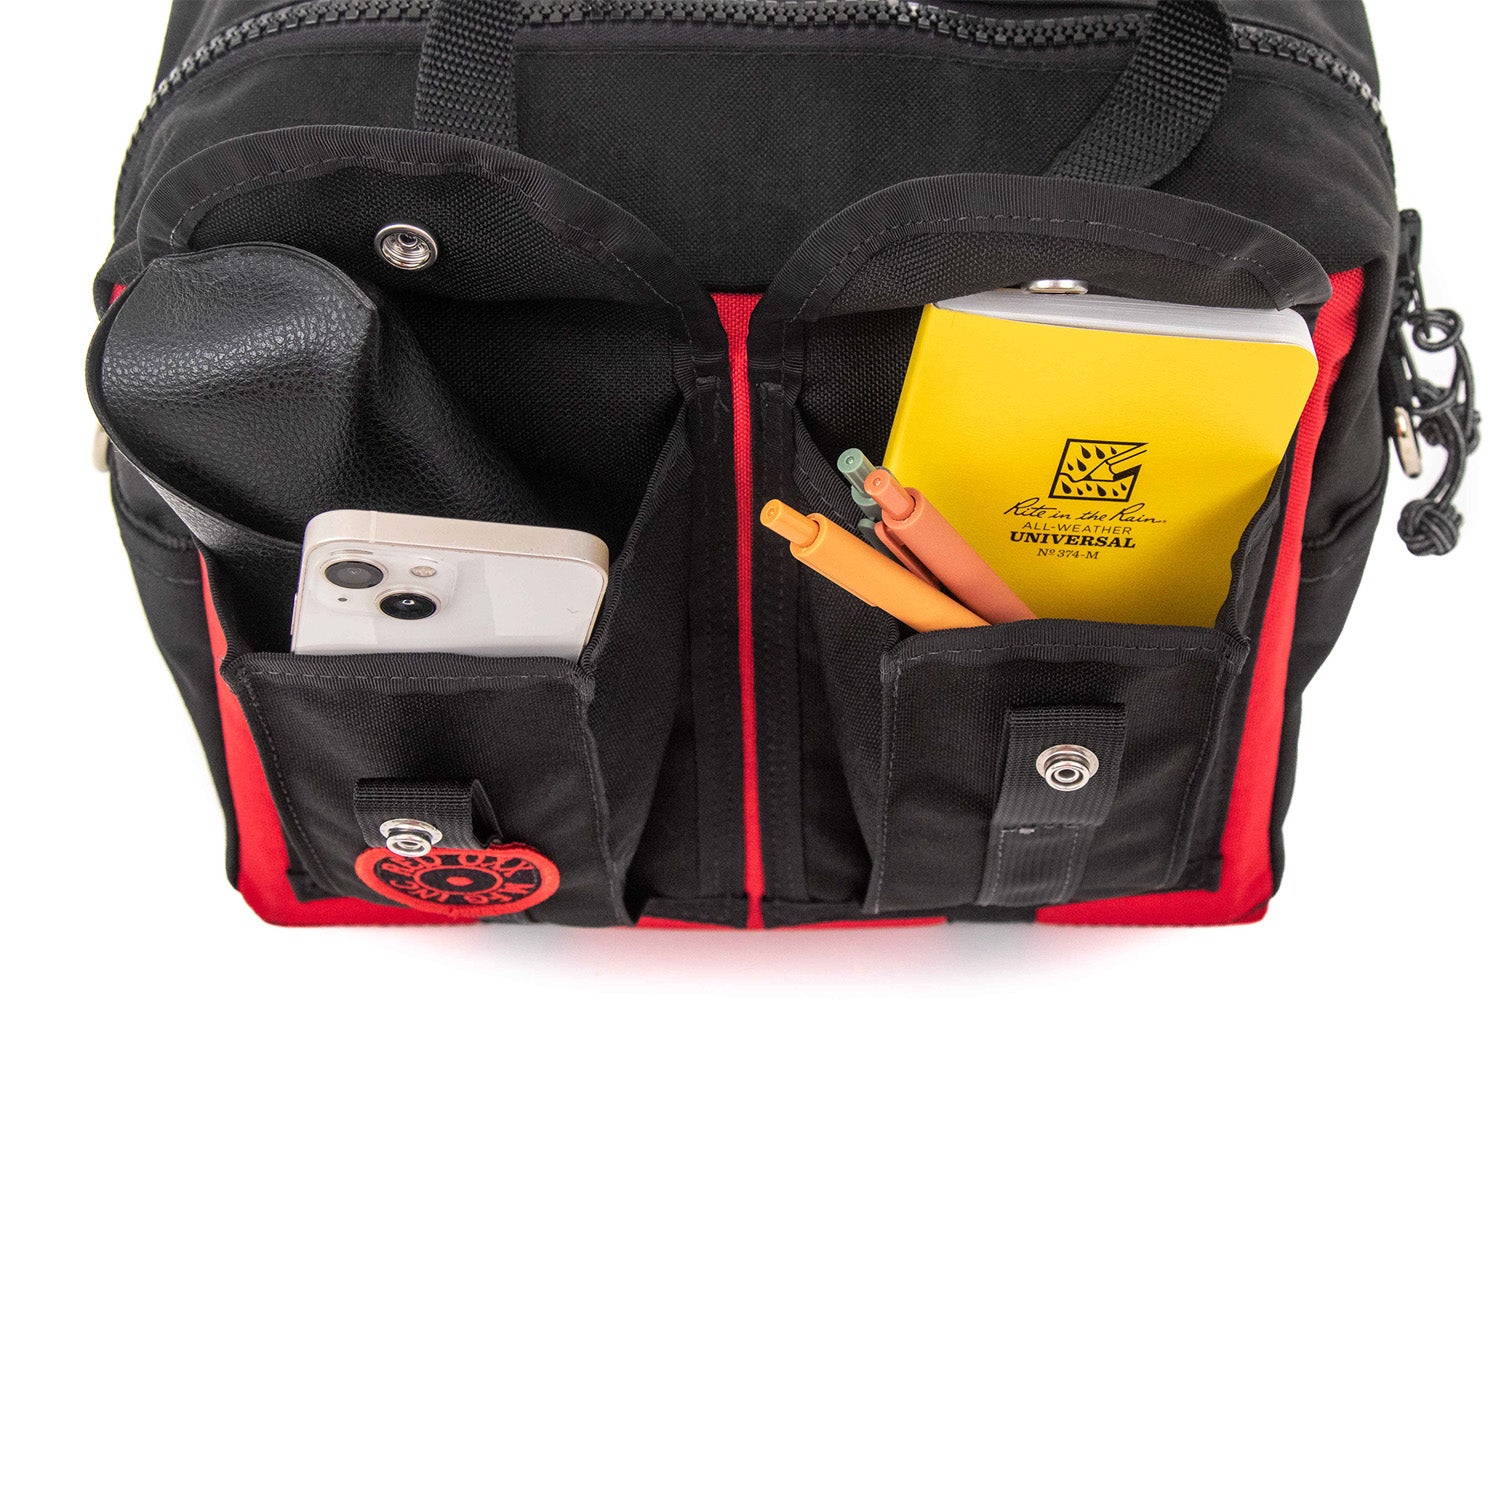 Expandable side pockets loaded with EDC gear. 